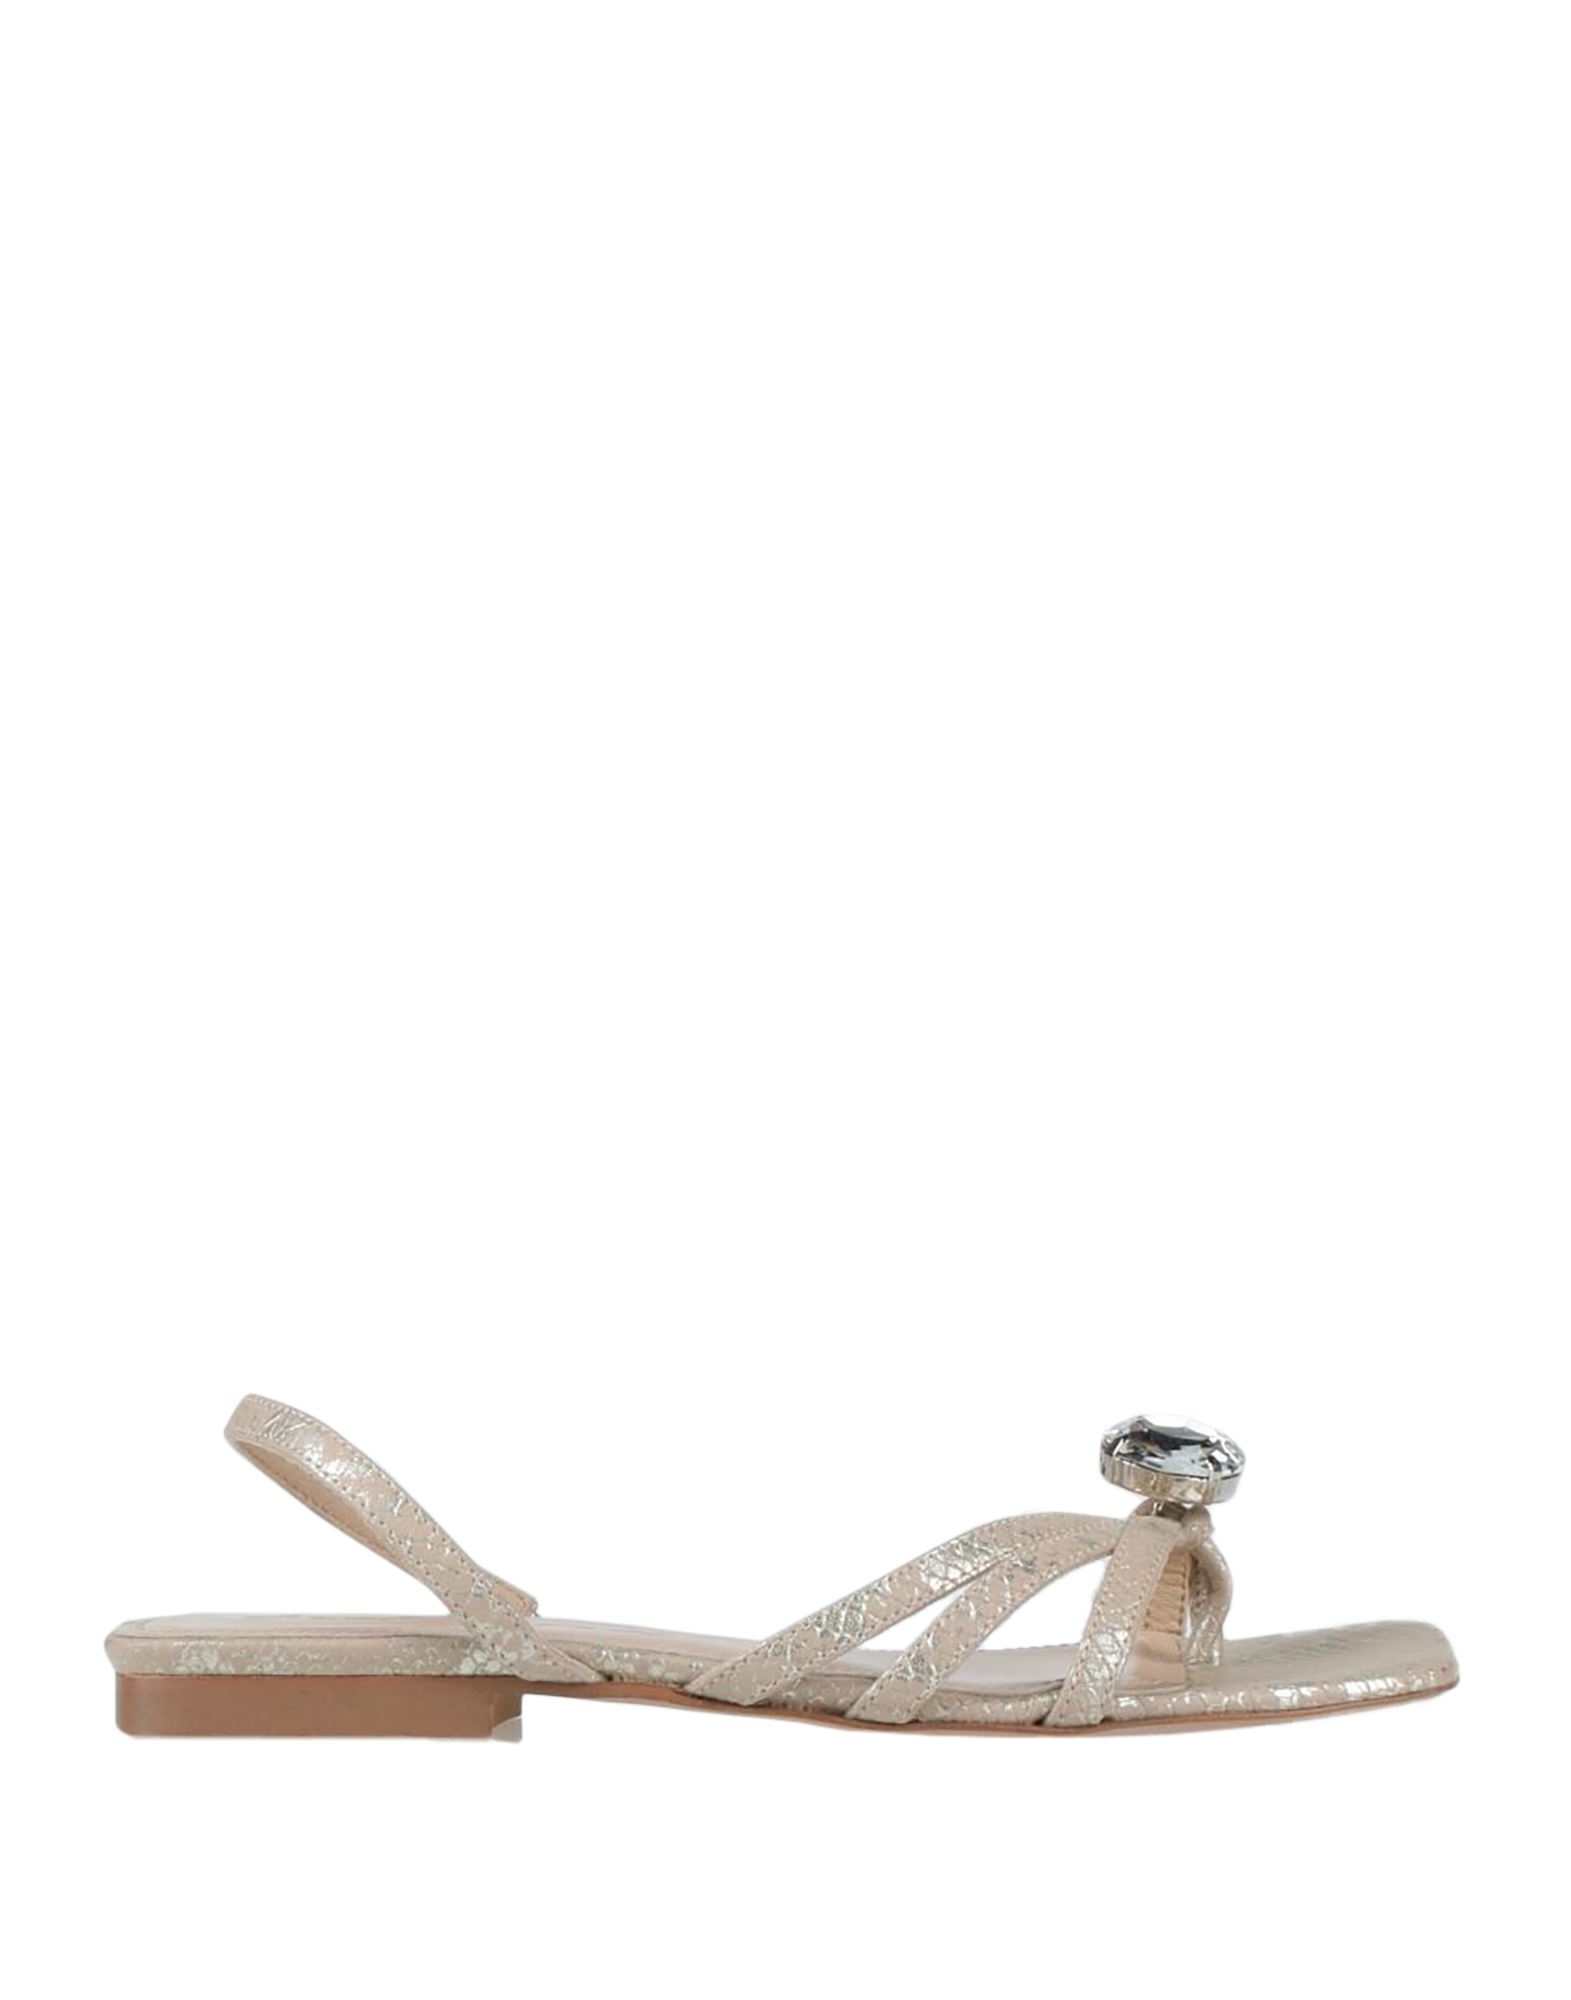 Shop Manila Grace Woman Thong Sandal Sand Size 6 Soft Leather In Beige